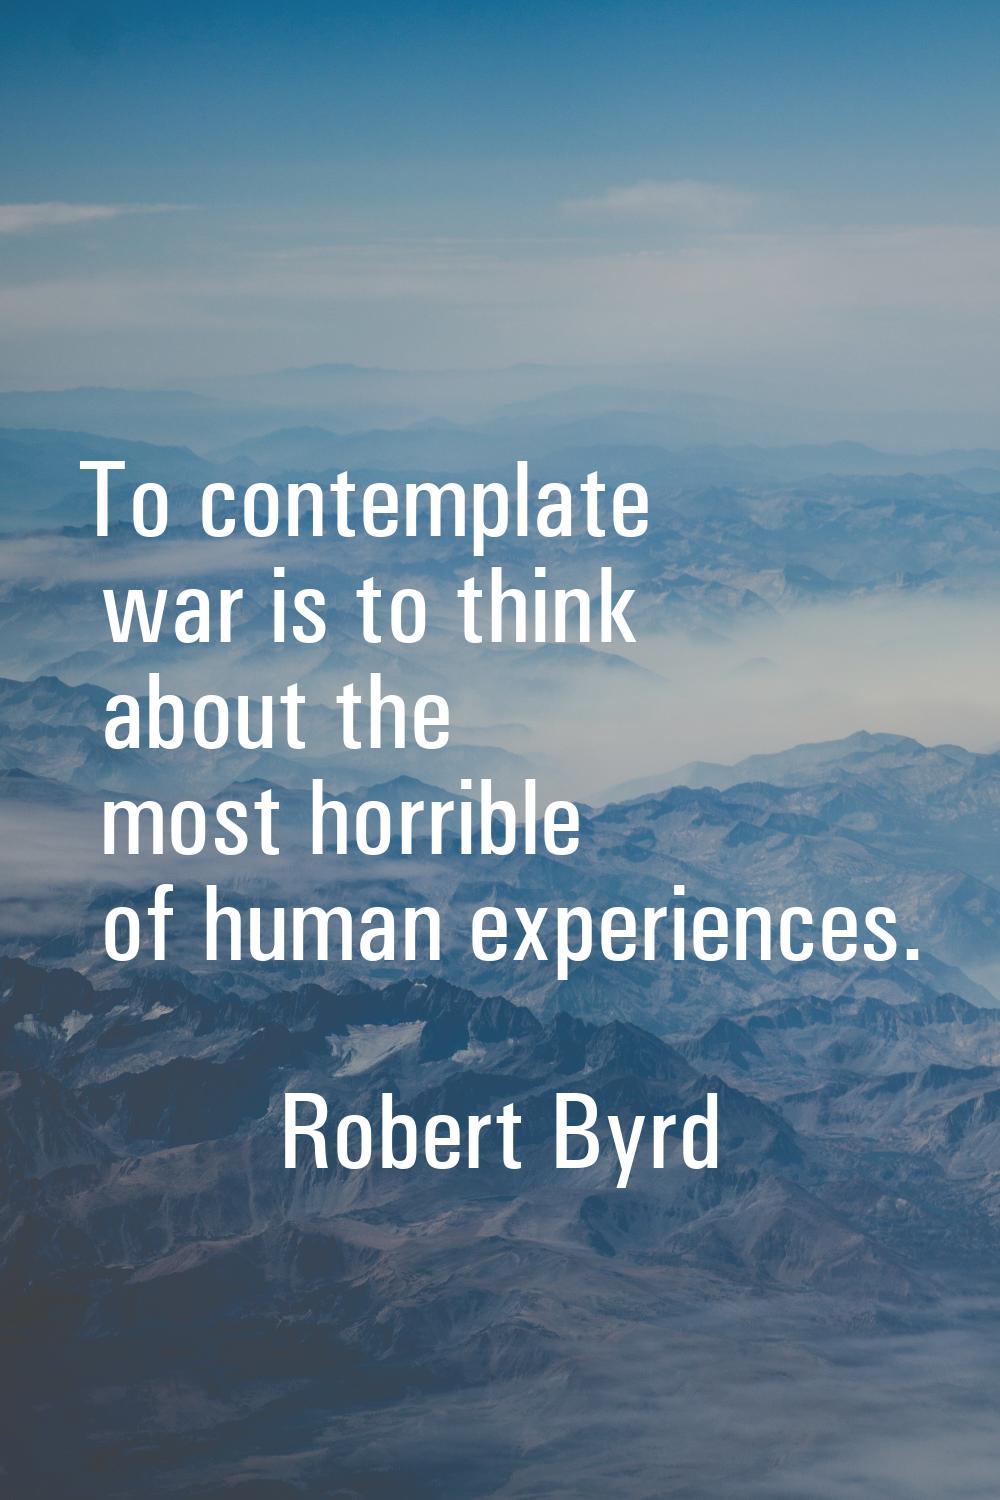 To contemplate war is to think about the most horrible of human experiences.